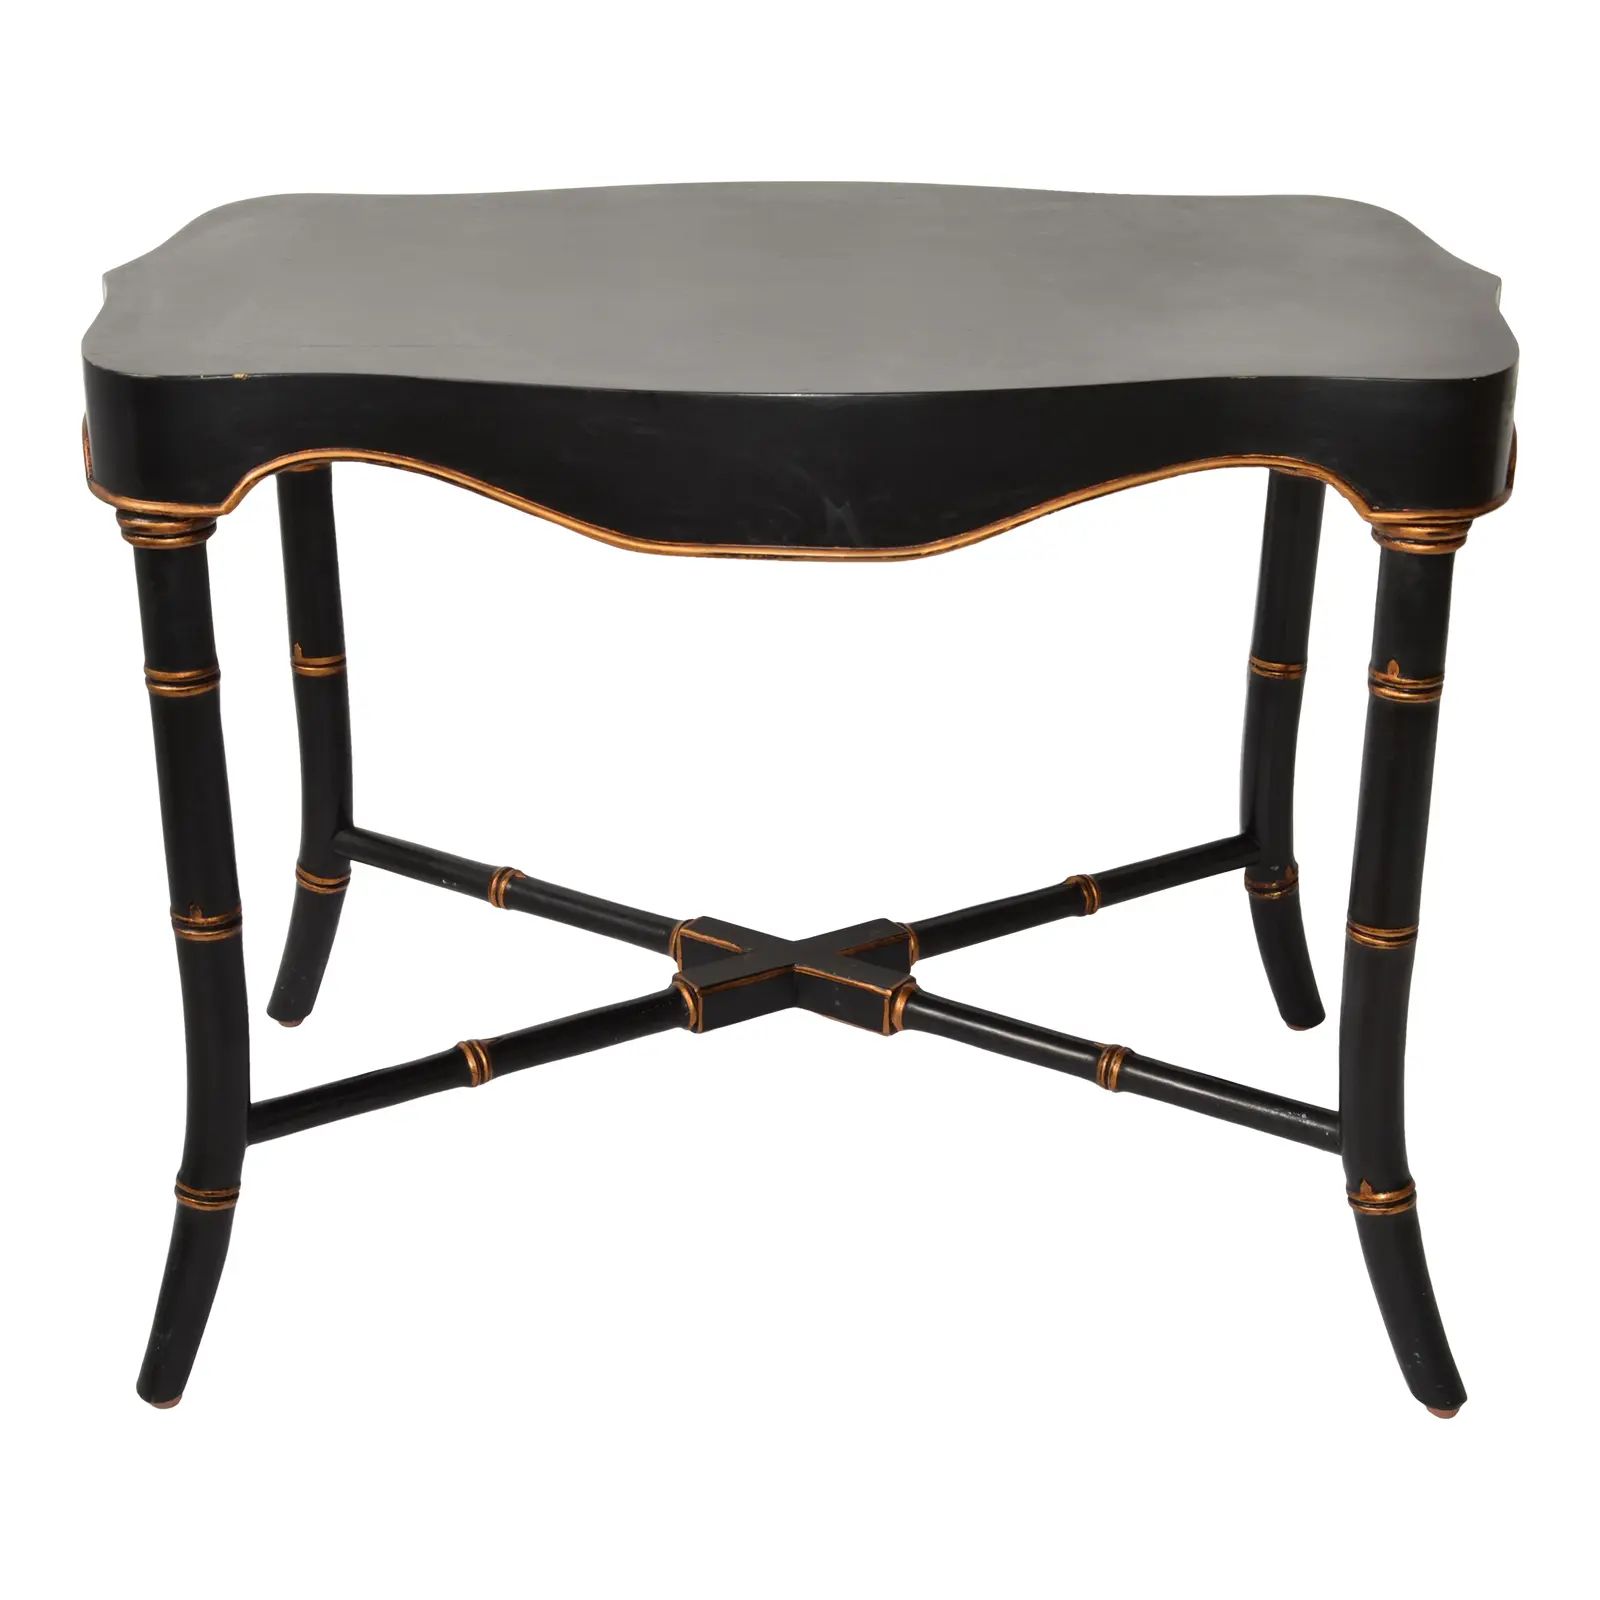 Victorian Mid-20th Century Black Gold Finish Accent Table Faux Bamboo Cross Base | Chairish